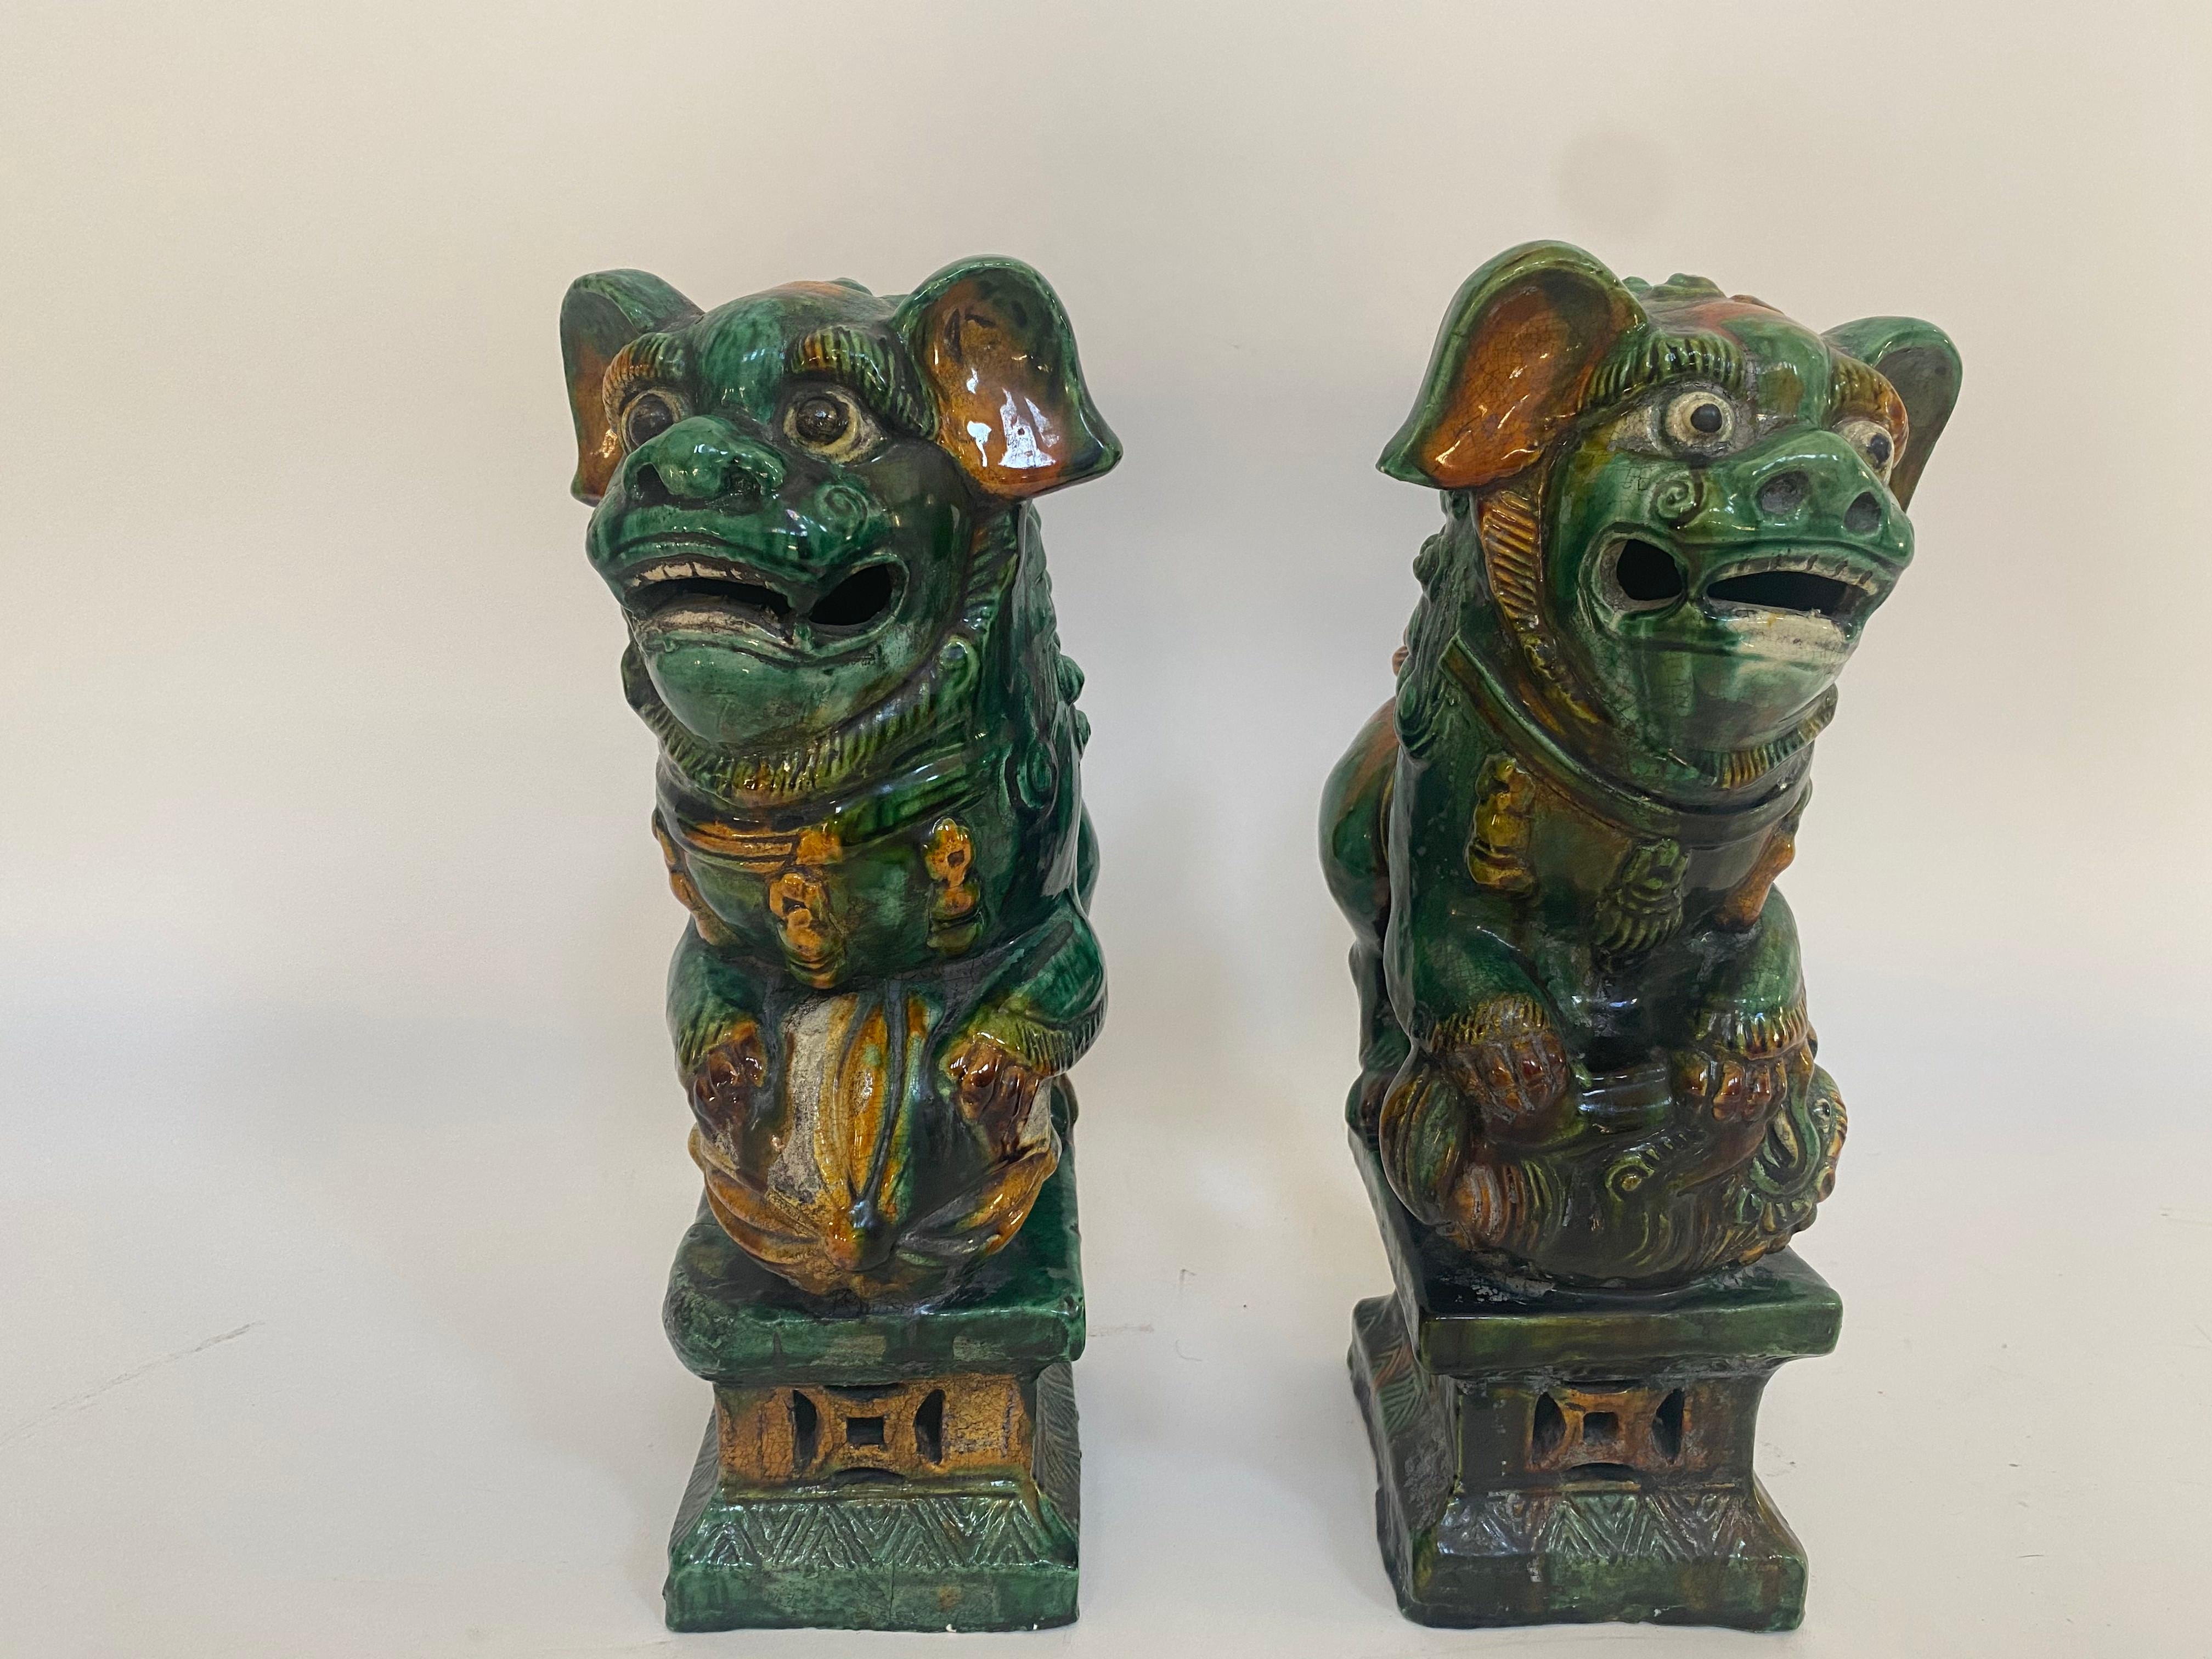 19th century Chinese tri-colored glazed foo lions.
Beautiful pair of antique Chinese foo lions/dogs. The glaze still shines, there are minor chips here and there. Always standing in pairs, foo dogs are fantasy lions in Chinese mythology who serve